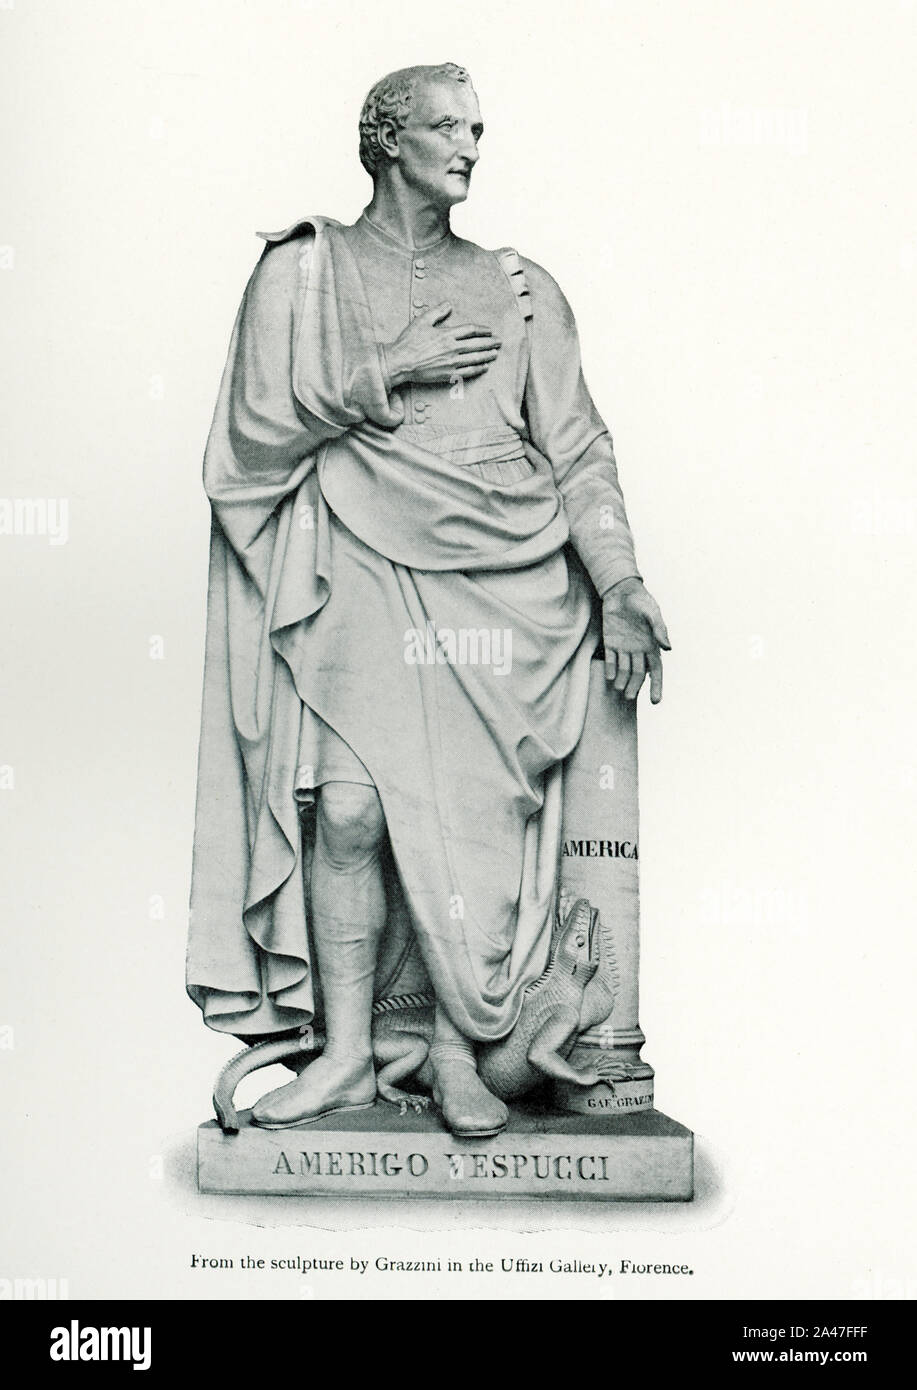 This photo dating to 1912 shows Amerigo Vespucci, a sculpture of him by Grazzini that is housed in the Uffizi Gallery in Florence. Vespucci (1454-1512)  was an Italian explorer, financier, navigator, and cartographer who was born in the Republic of Florence. He is best known for his namesake: the continents of North and South America Stock Photo